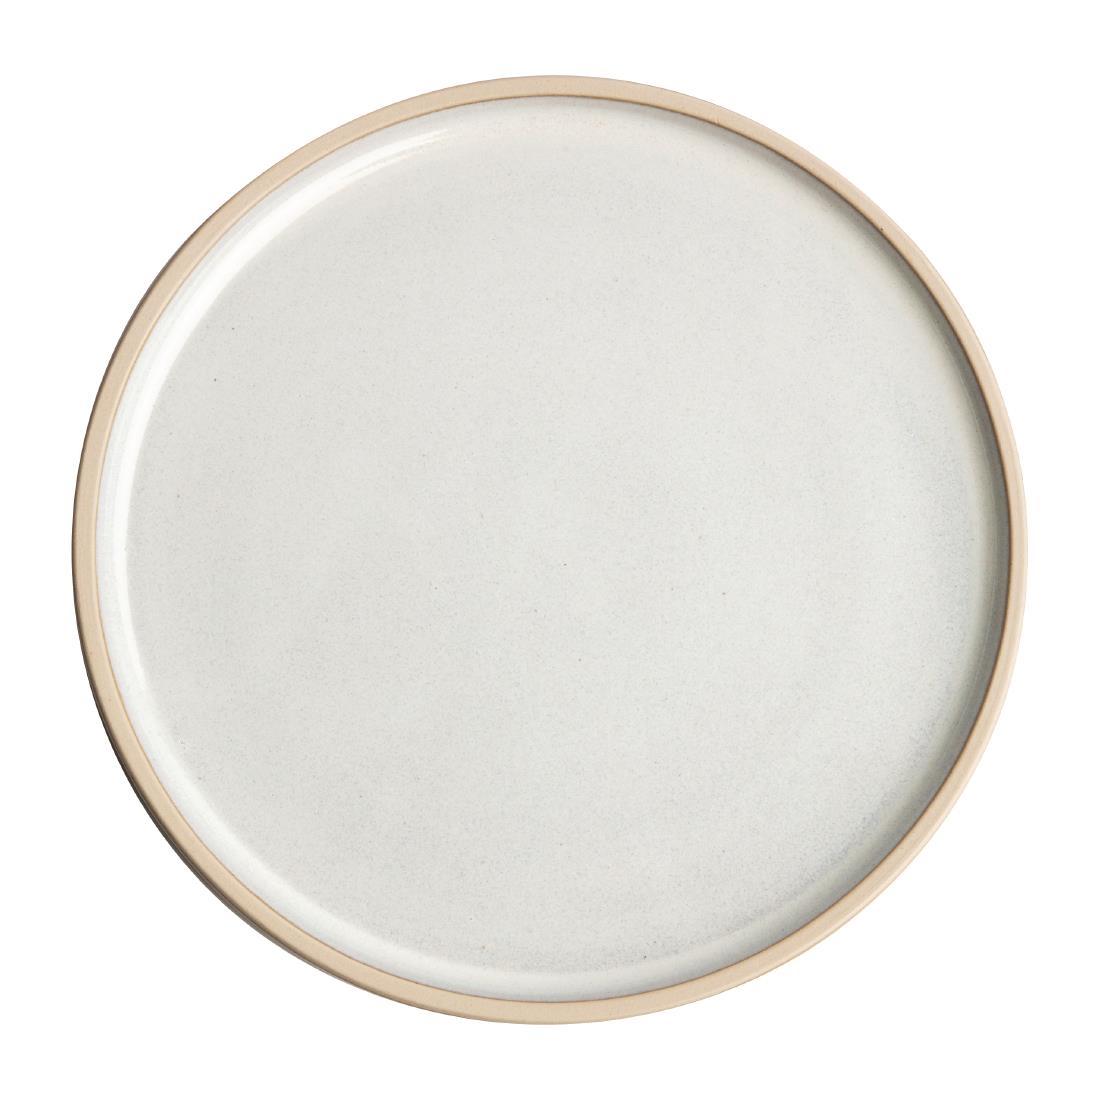 Olympia Canvas Flat Round Plate Murano White 180mm (Pack of 6) - FA328  - 1